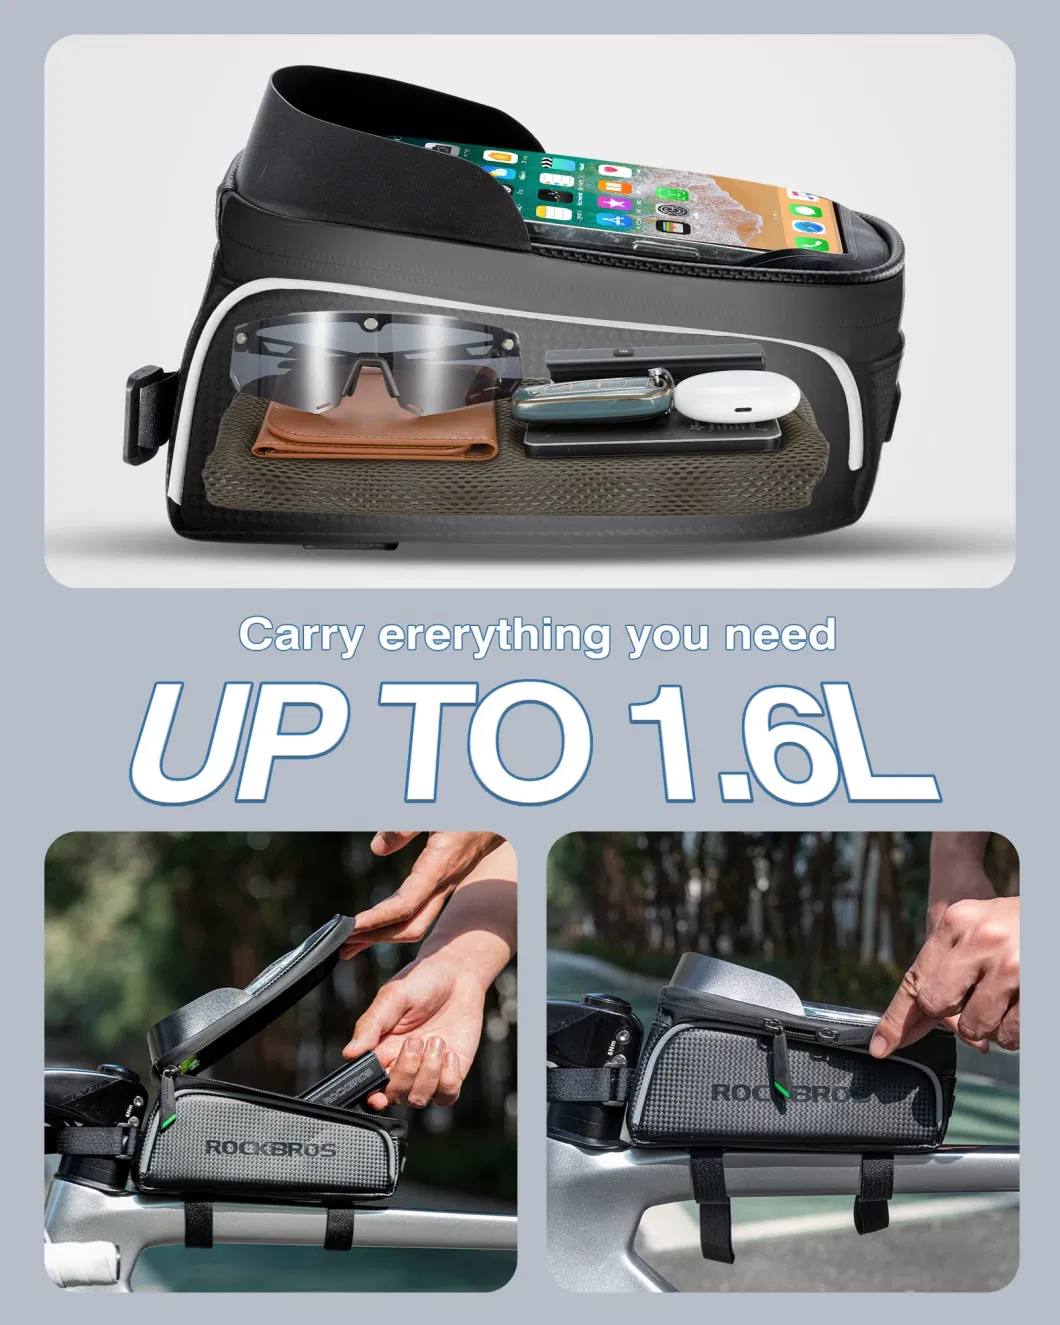 Bike Phone Front Frame Bag Bicycle Bag Waterproof Bike Phone Mount Top Tube Phone Case Holder Accessories Cycling Pouch Compatible Phone Under 6.5inches